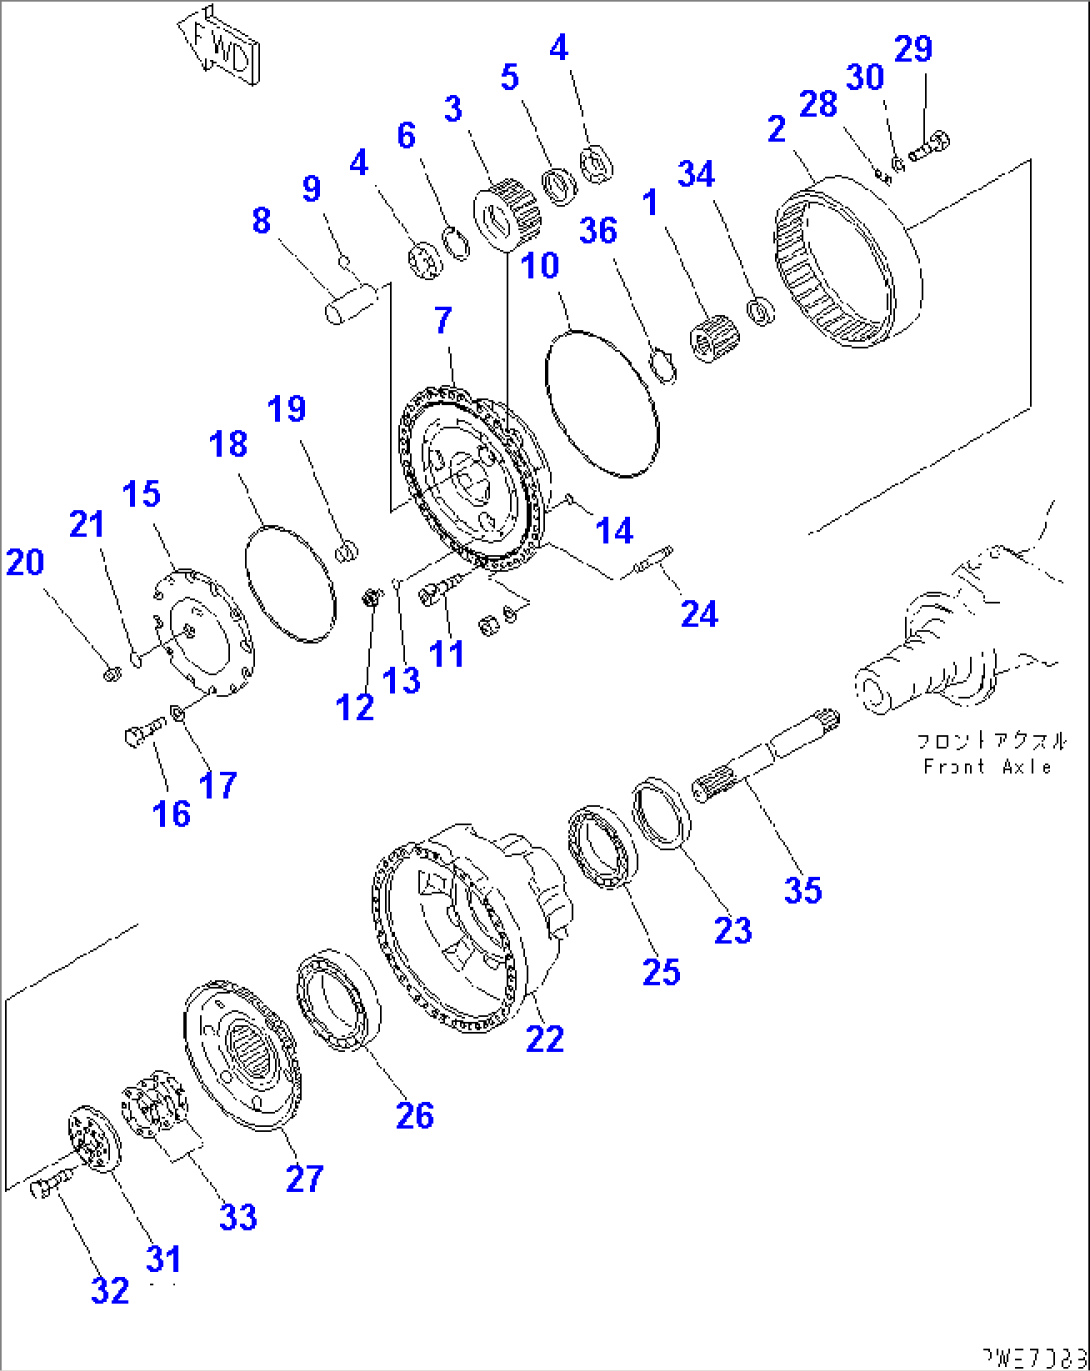 FRONT AXLE (FINAL DRIVE)